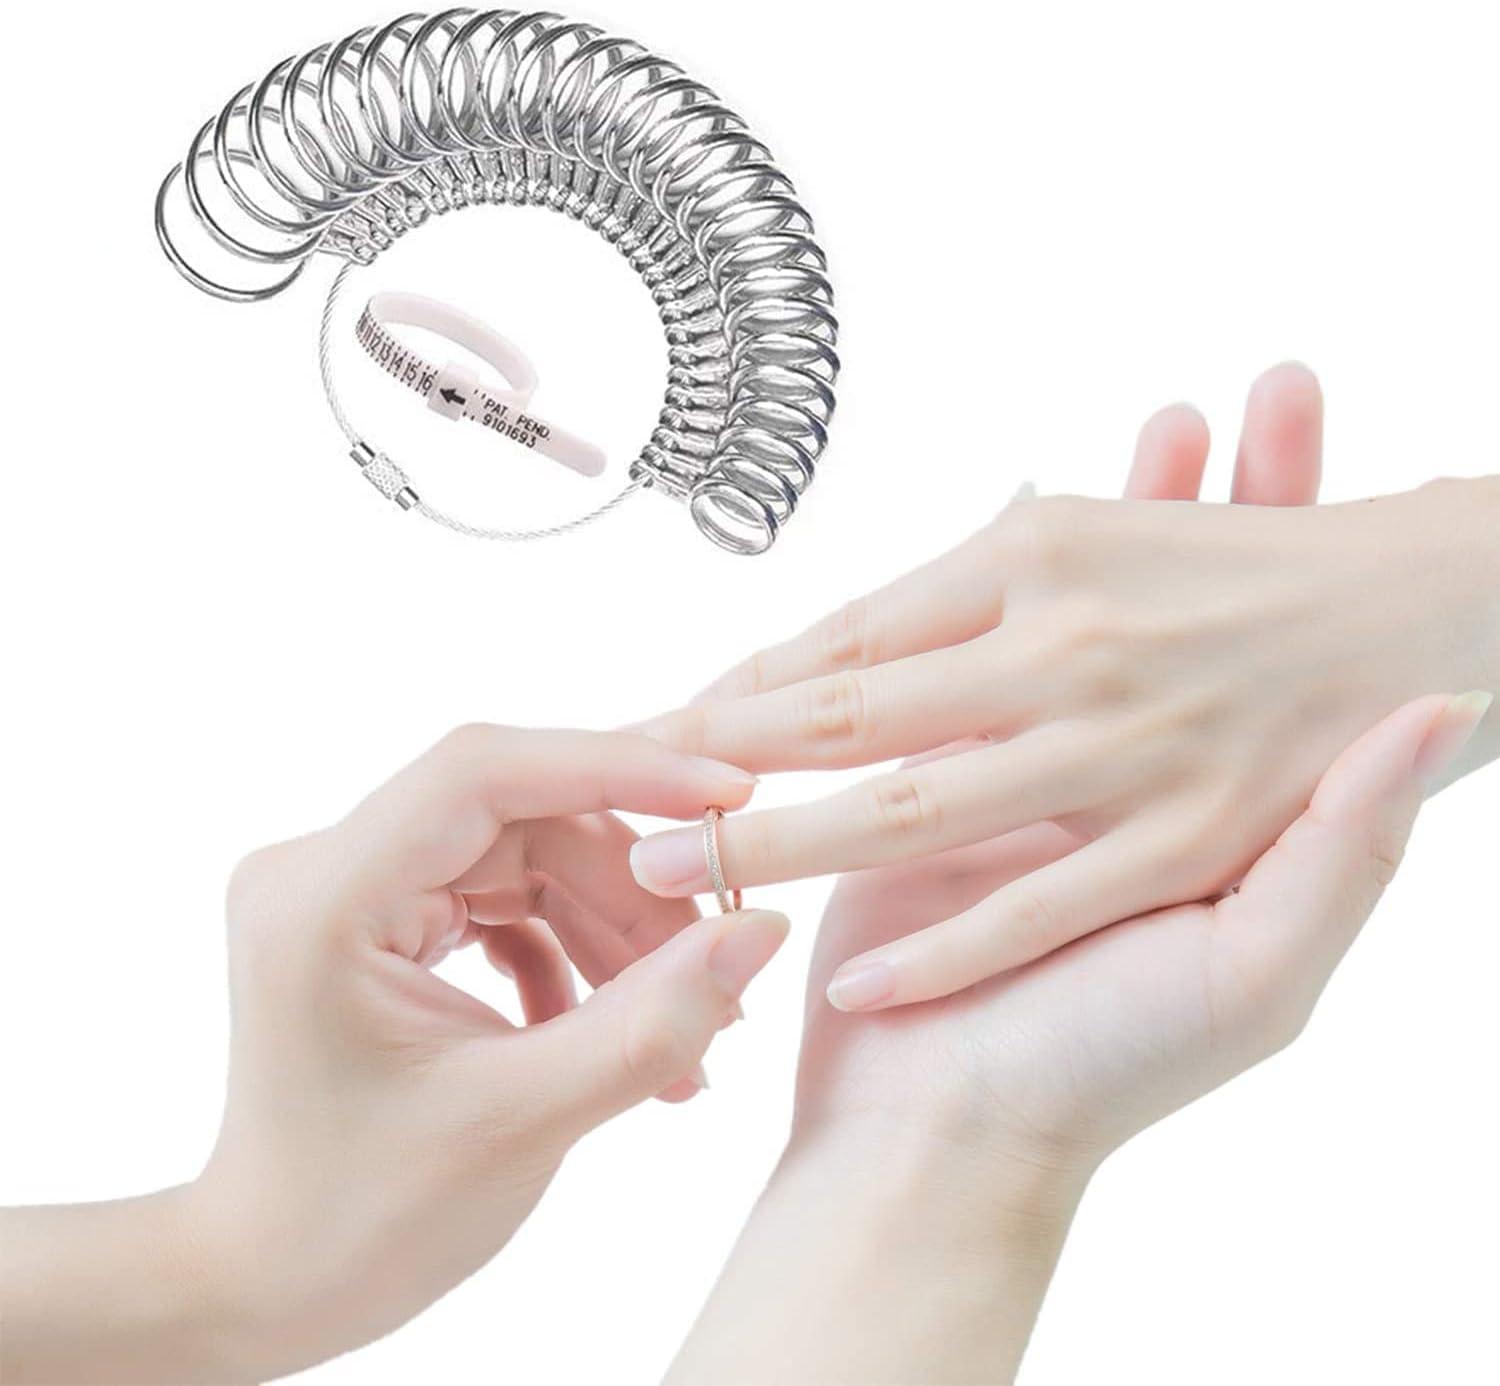 Accurately Measure Your Ring Size with this Stainless Steel Finger Sizer  Tool - 0-13 With Half Sizes!